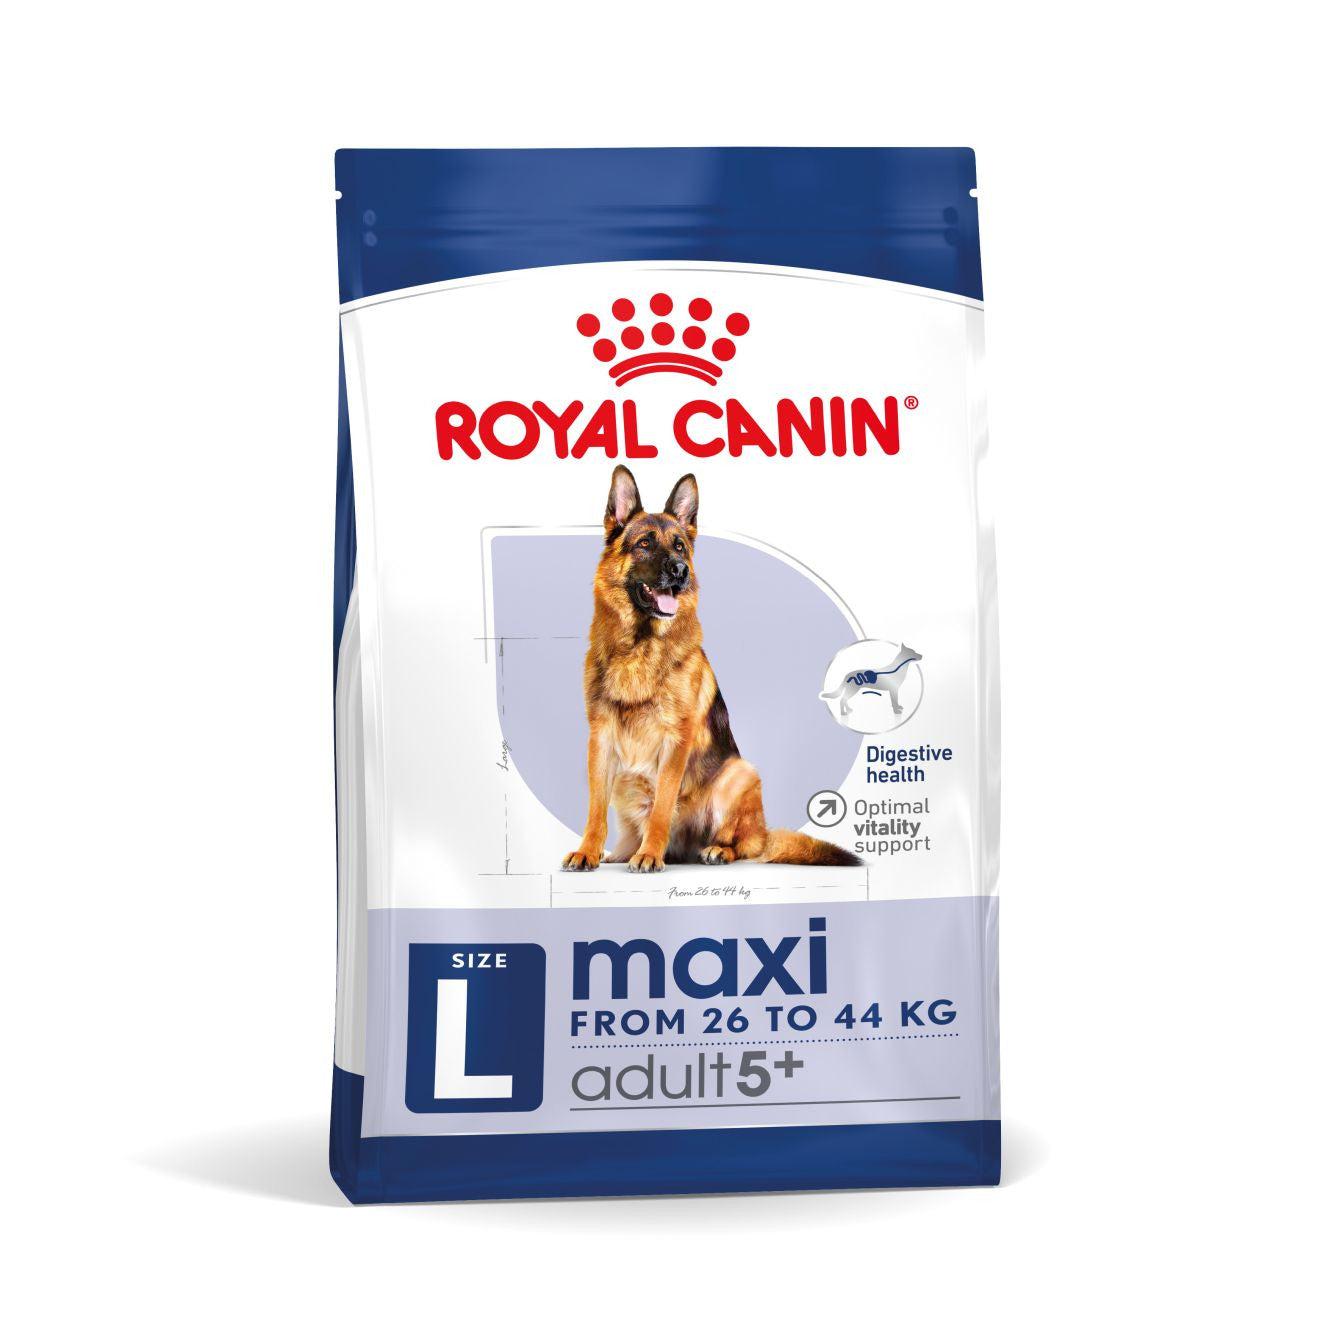 Royal Canin  Maxi Adult 5+ Dry Dog Food - All Sizes